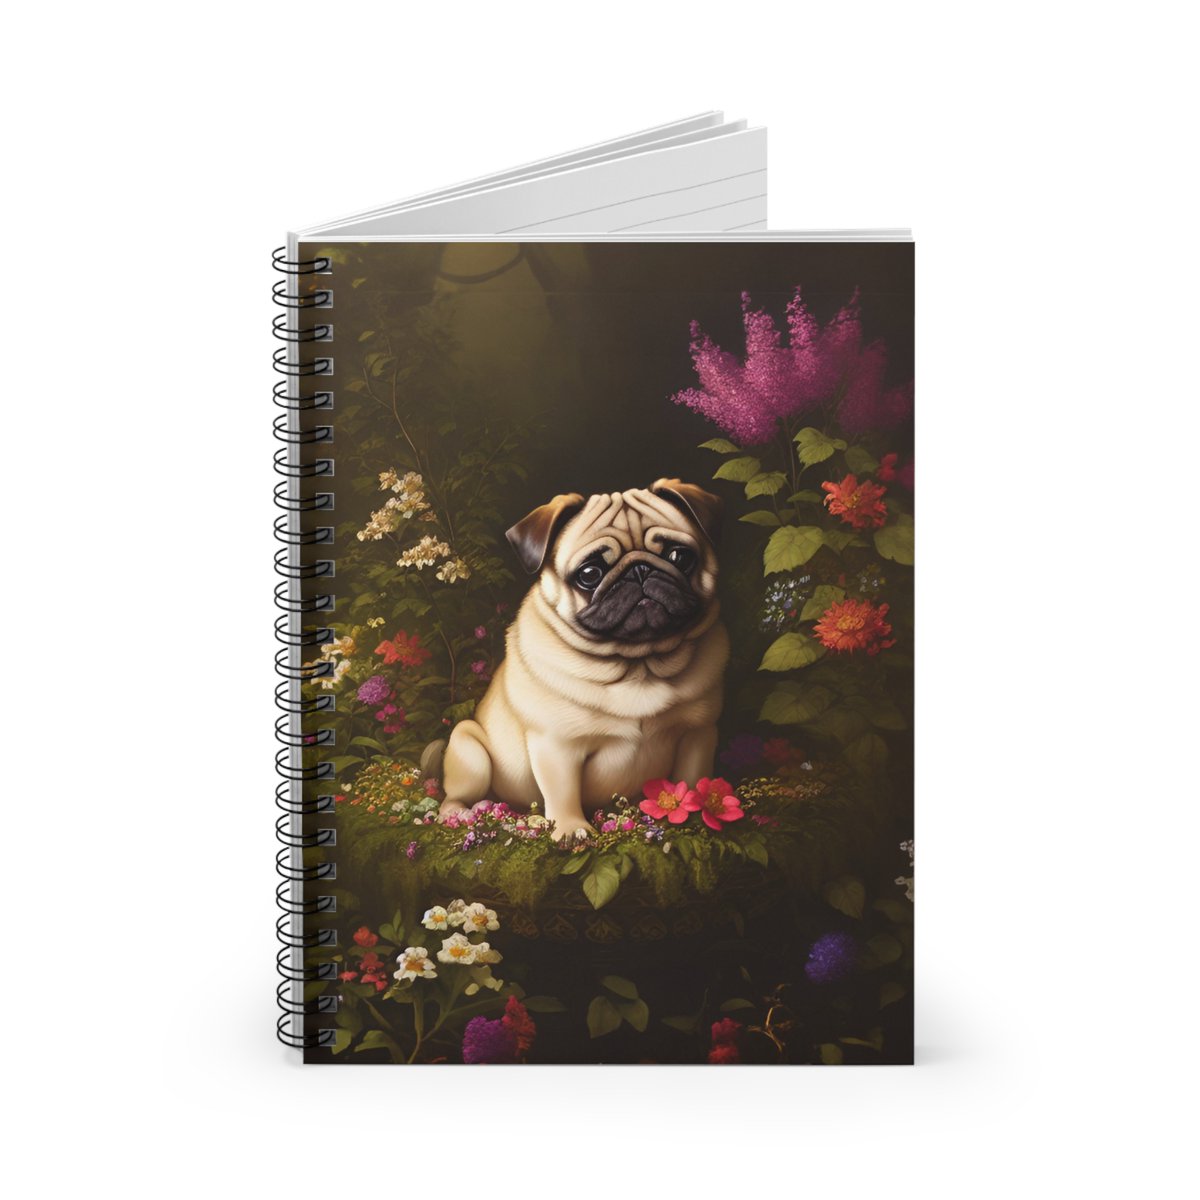 Pug Dog Floral Spiral Notebook.  Shopping lists, school notes or poems - 118 page spiral notebook with ruled line paper is a perfect companion in everyday life.  #journal #Notebook #spiralnotebook #vintagestyle #vintage #PugLover #puglife 

thistlemouse.co.uk/products/pug-d…